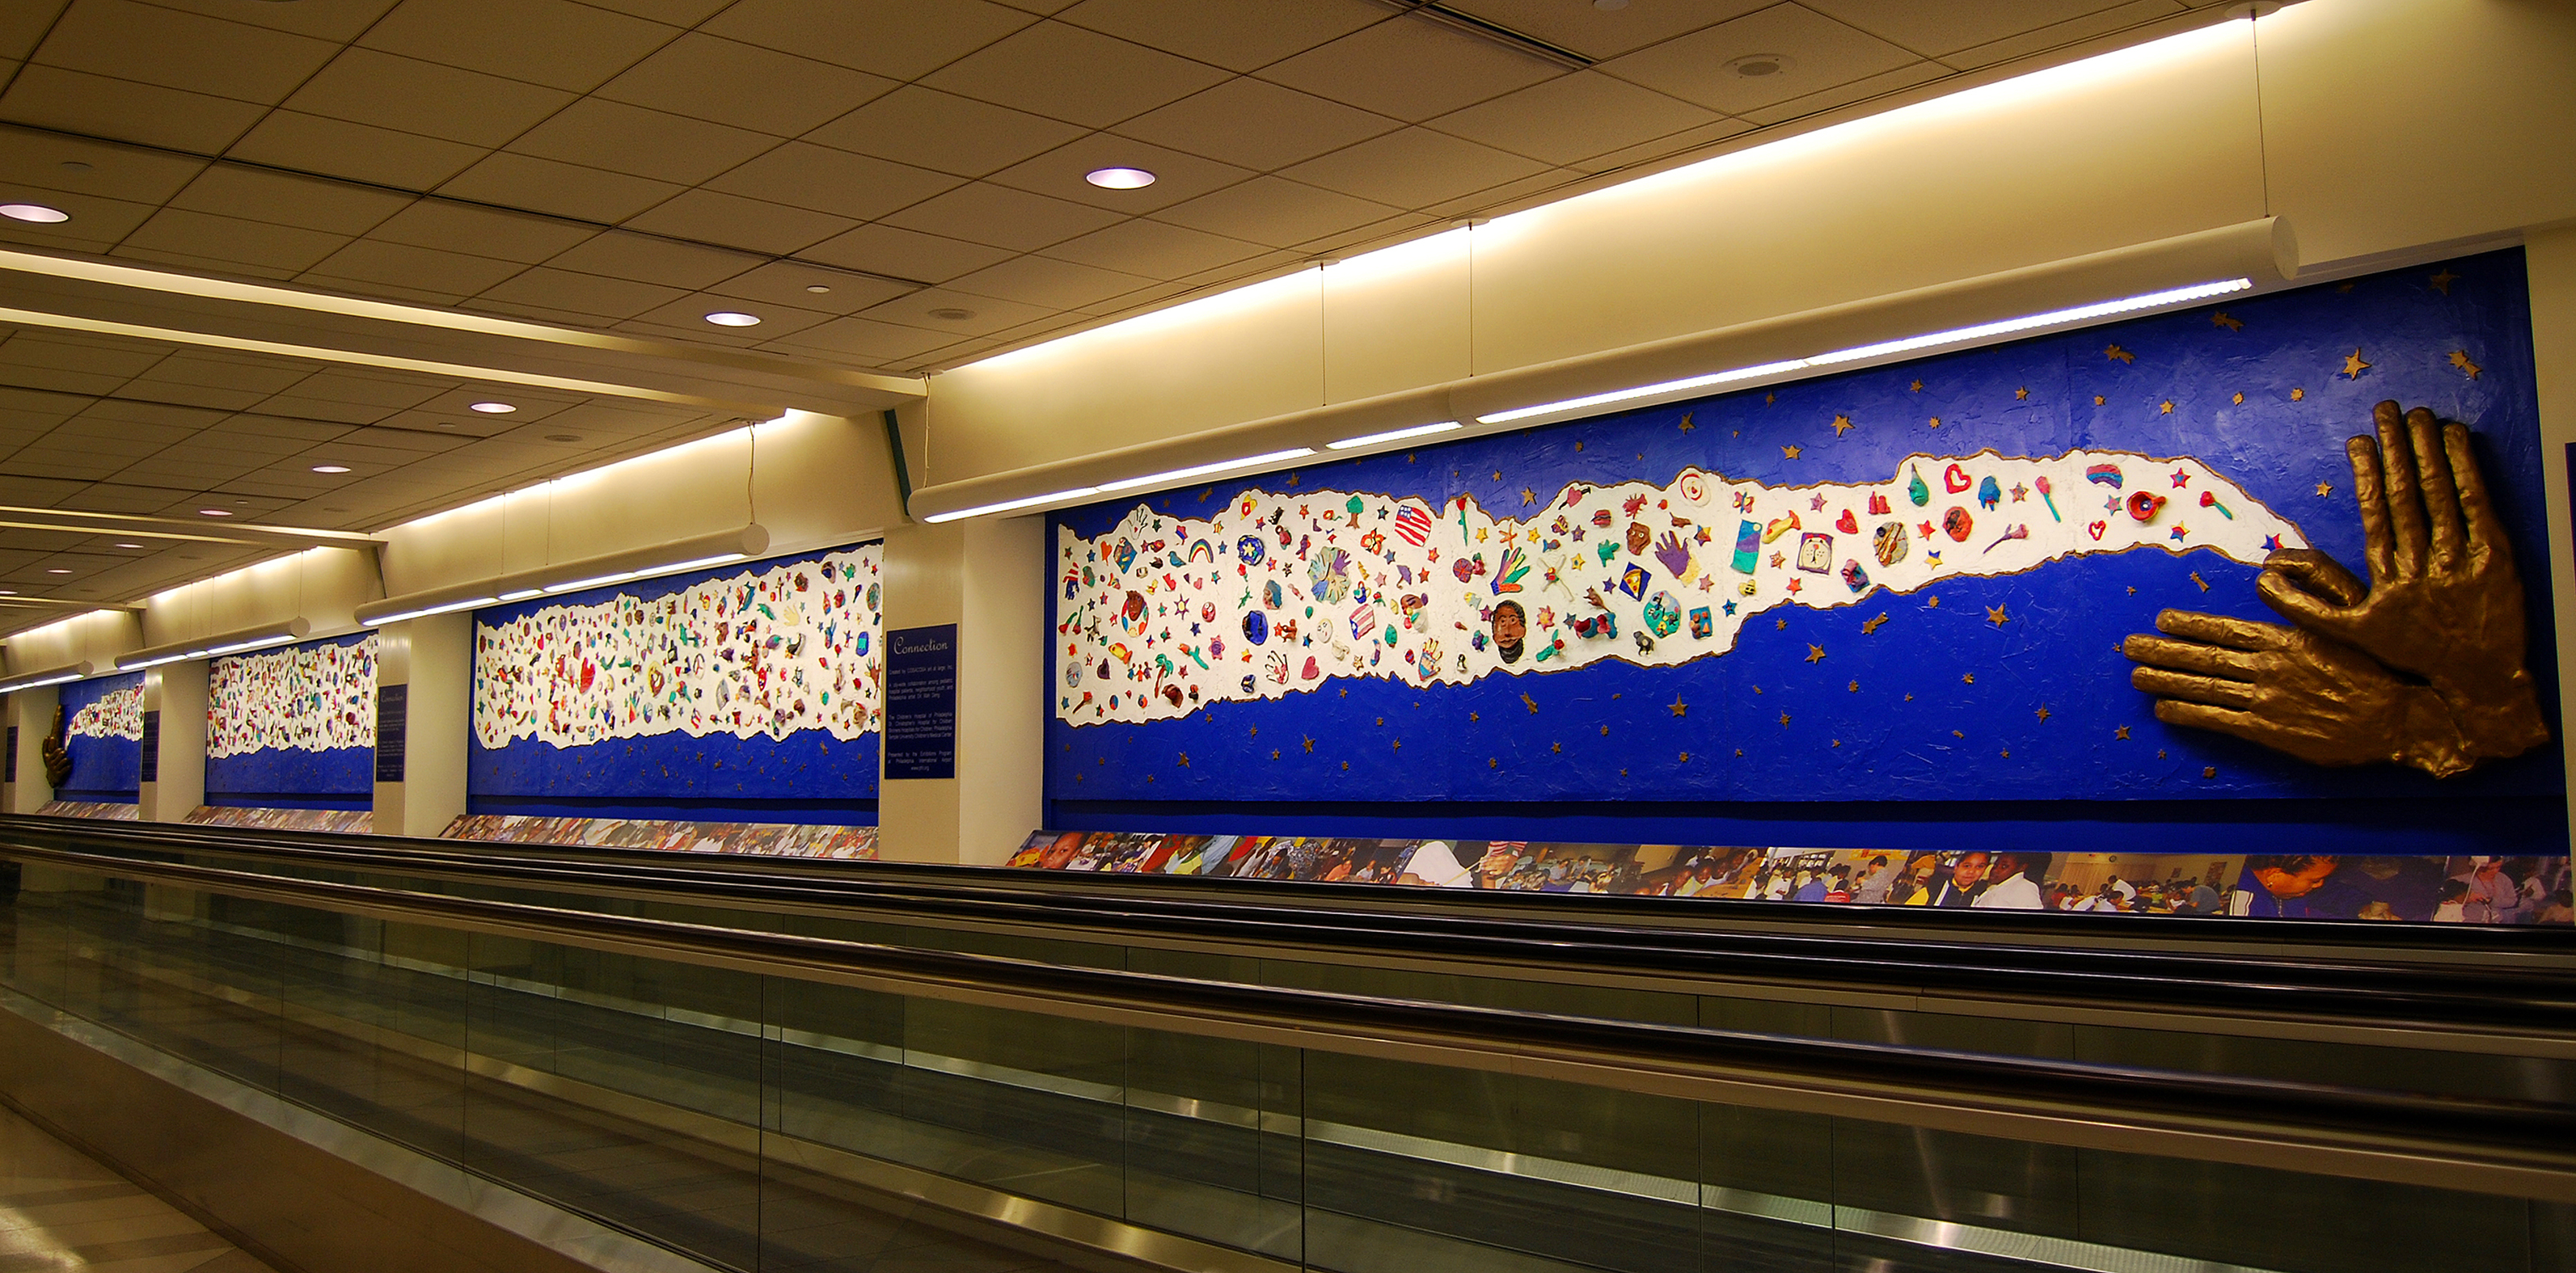 Mural on wall of airport.